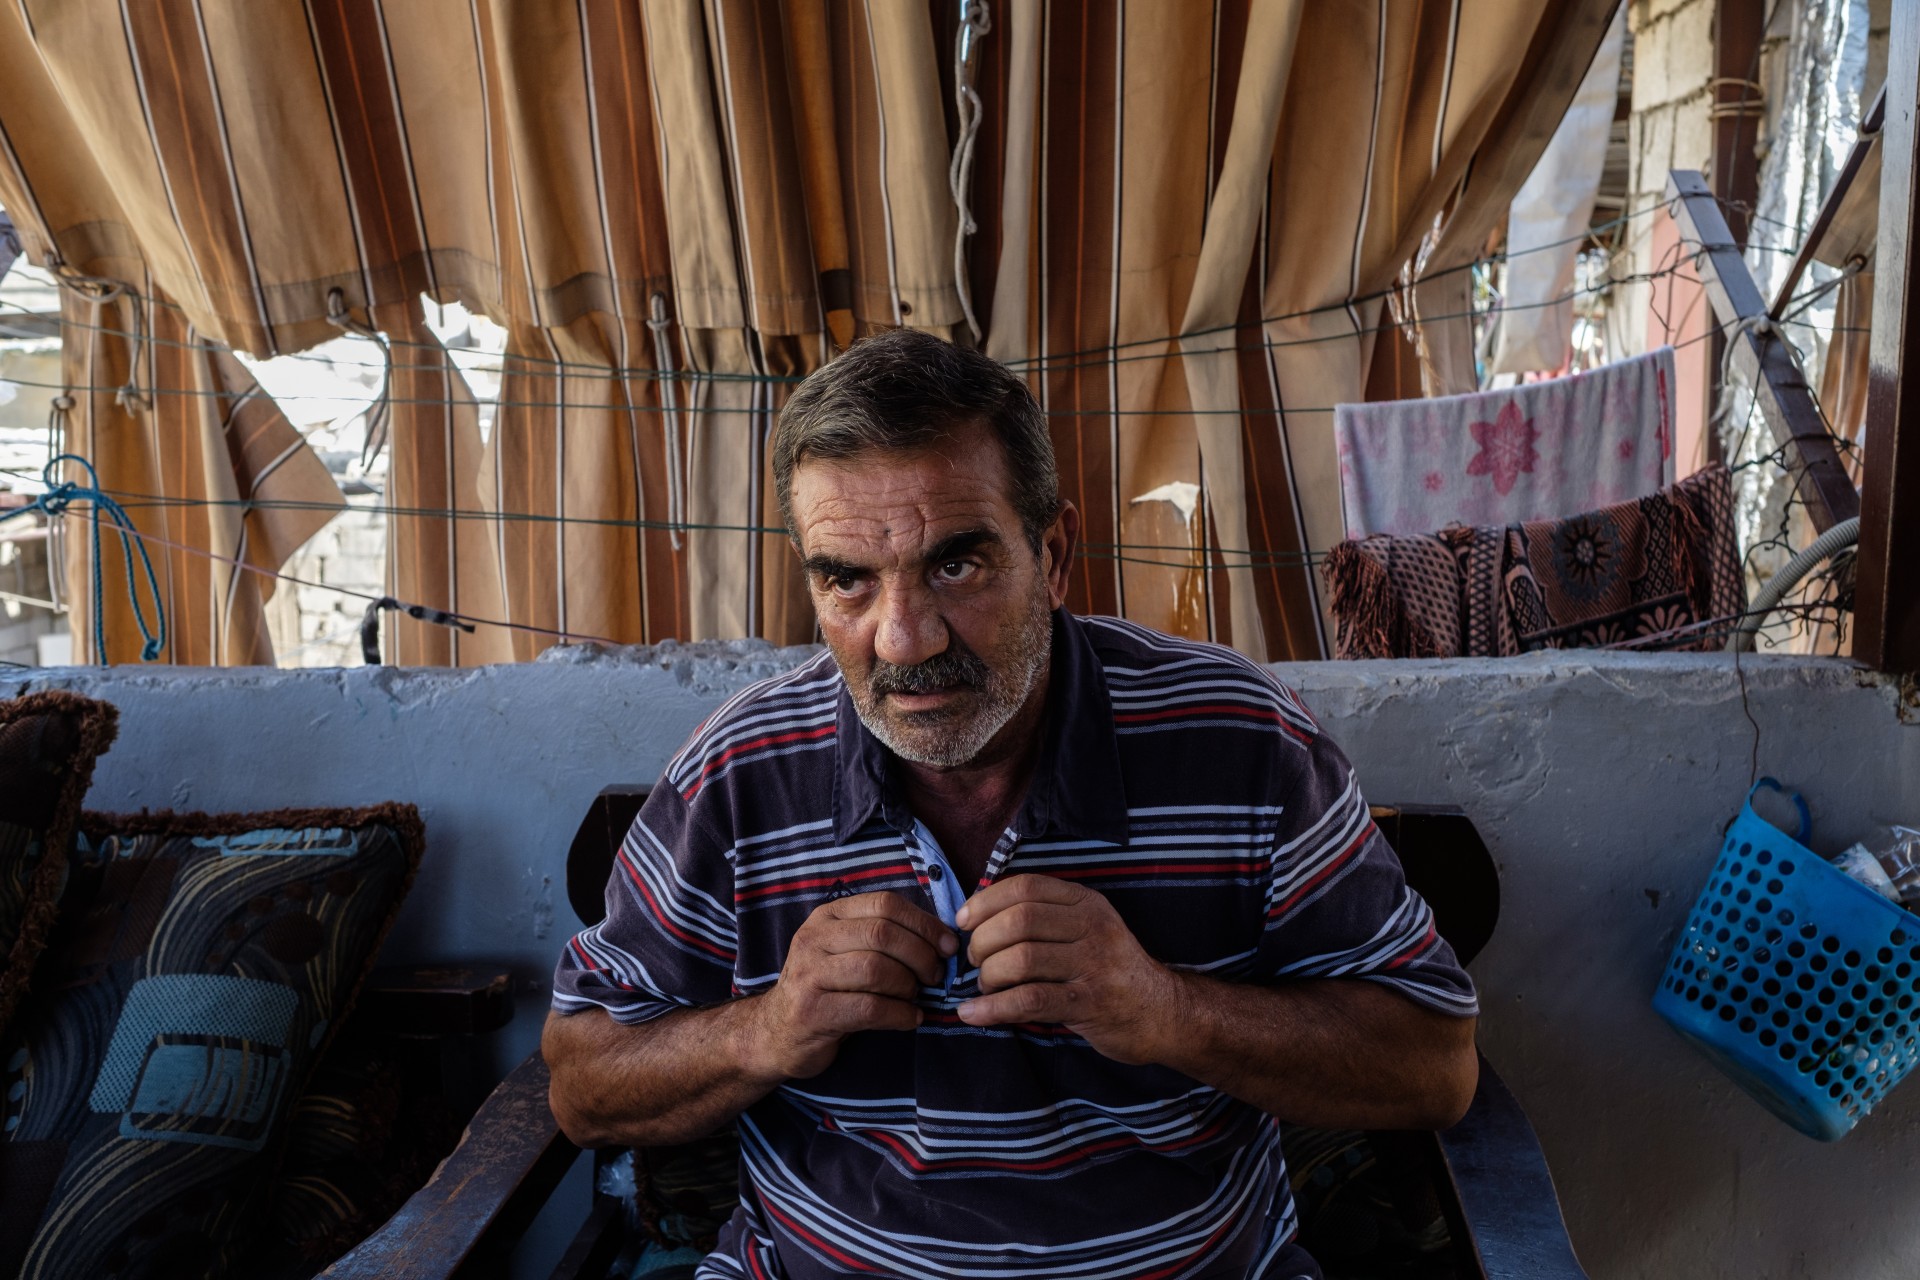 Riddah Ali Fayyad’s at his home in an area referred to as Horsh, where the massacre started (MEE/Rita Kabalan)